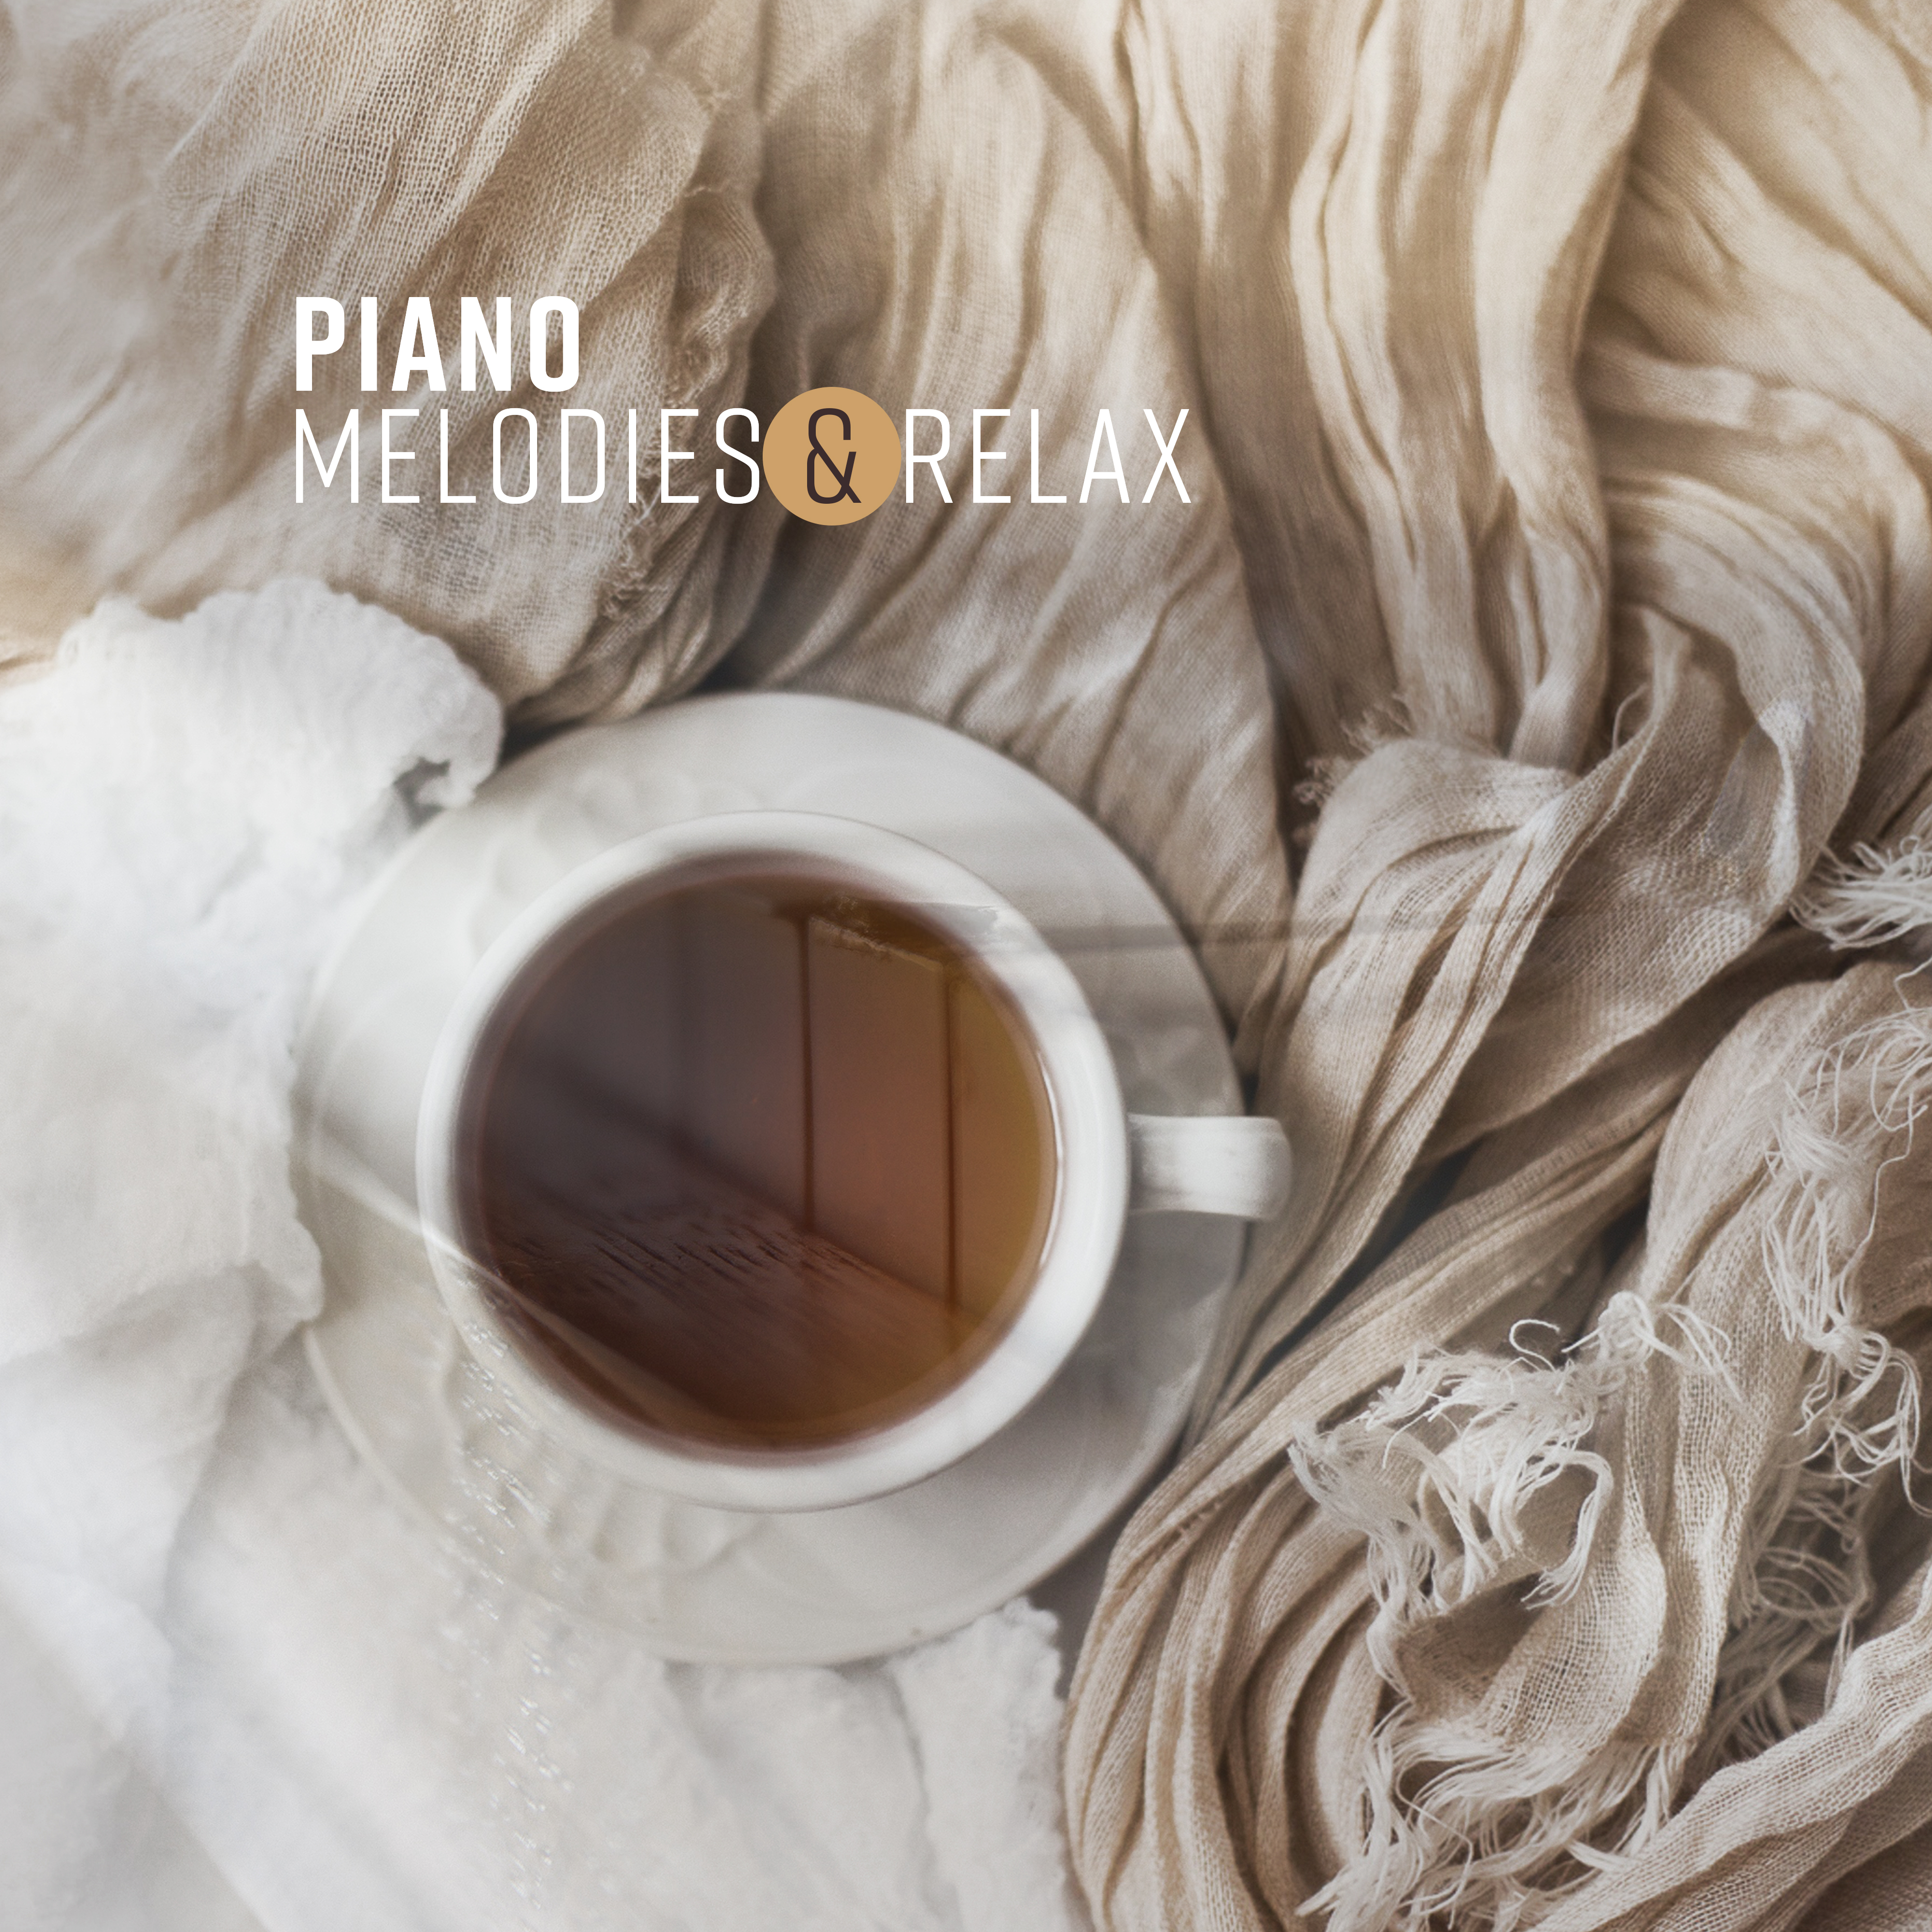 Piano Melodies & Relax